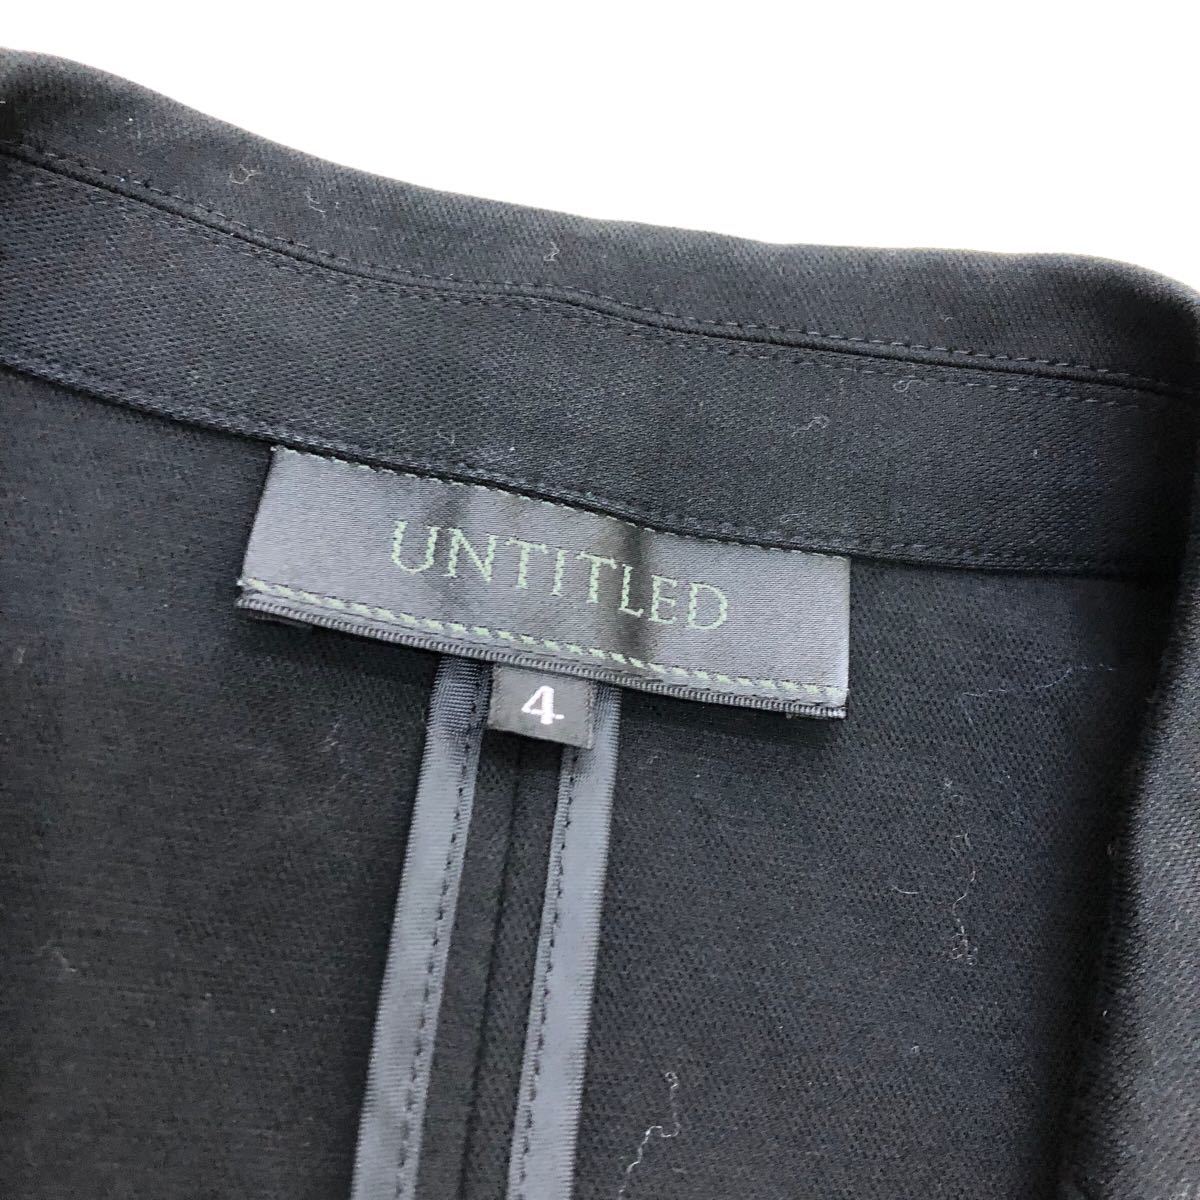 S188① made in Japan UNTITLED Untitled skirt suit suit jacket skirt outer garment feather weave bottoms ceremony suit 4 black black 